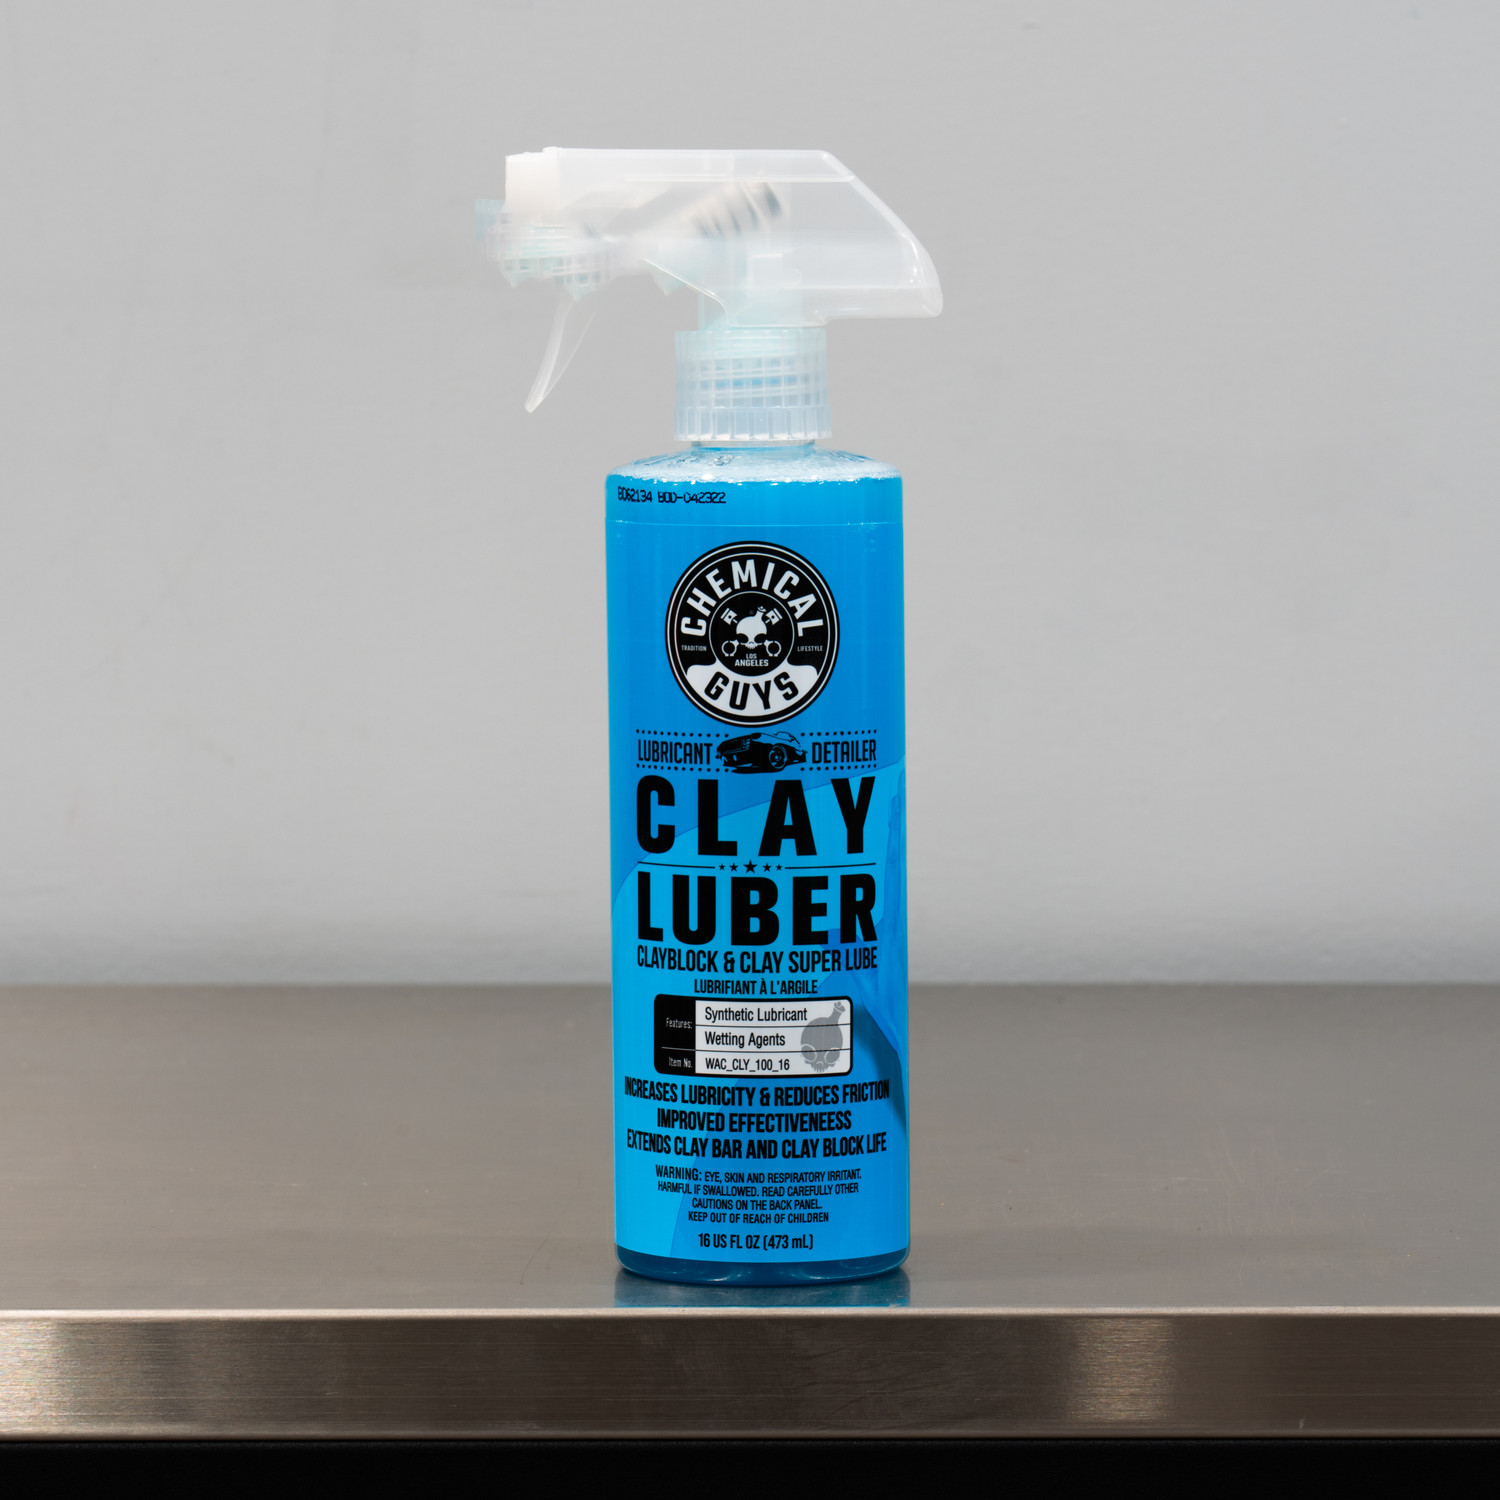 Chemical Guys Luber 16oz | Synthetic Clay Bar Lubricant Spray